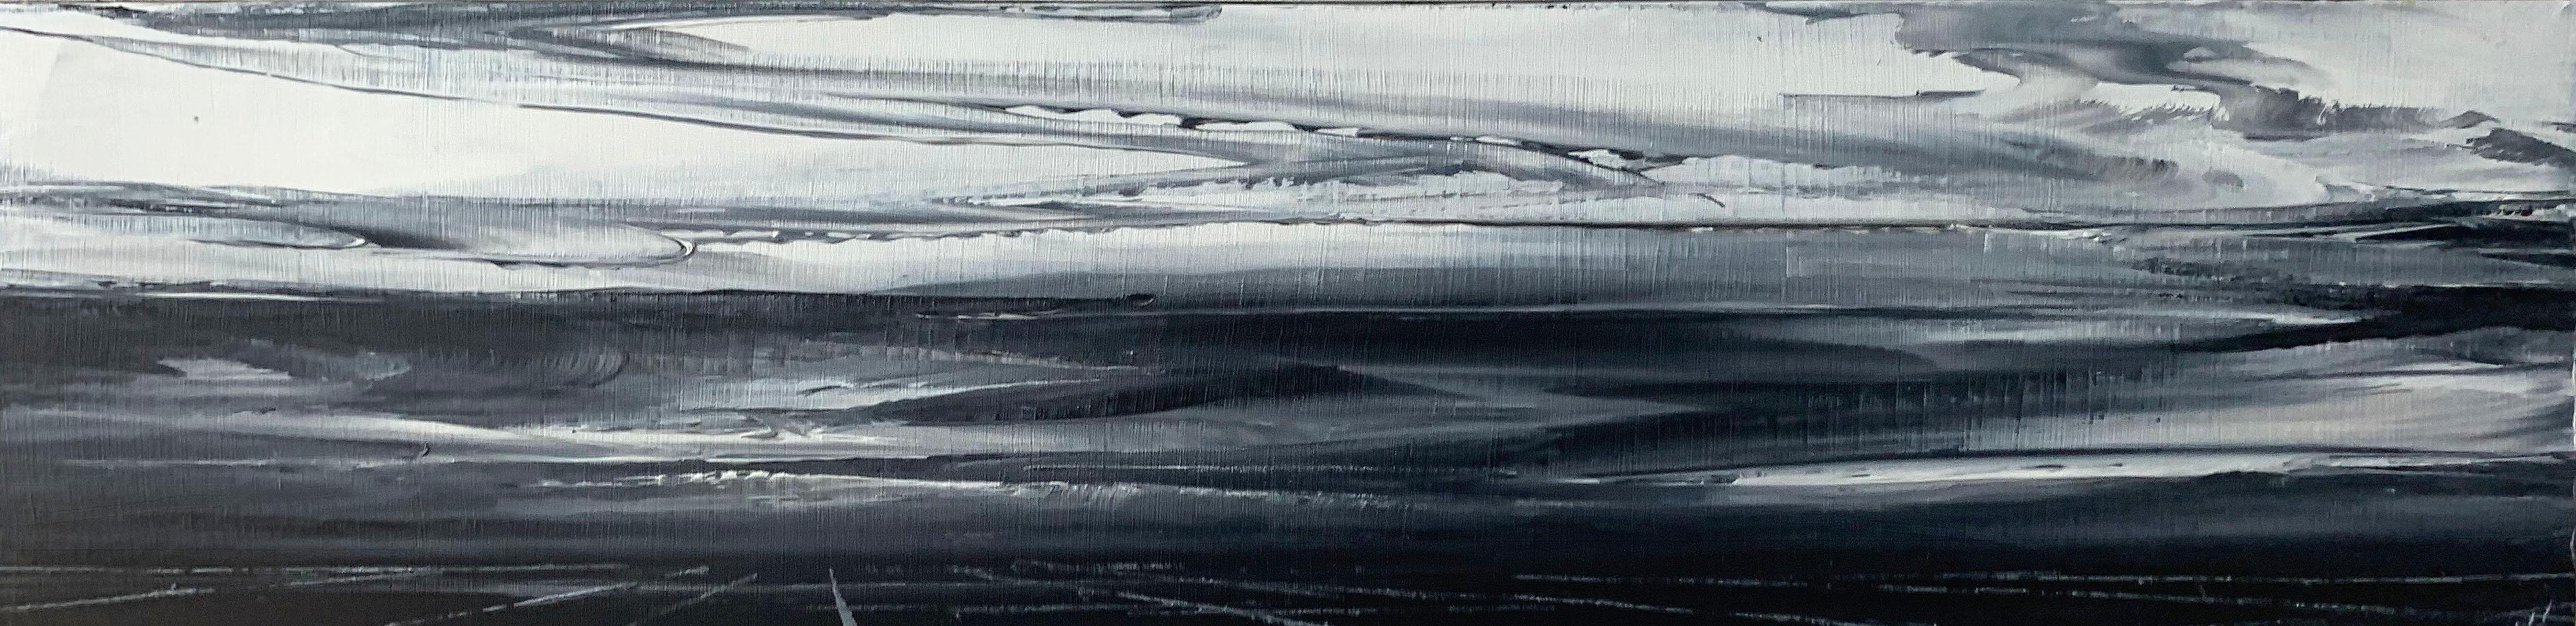 With Sky Peeled Back From The Earth, abstract black and white sky and clouds - Art by Todd Carpenter